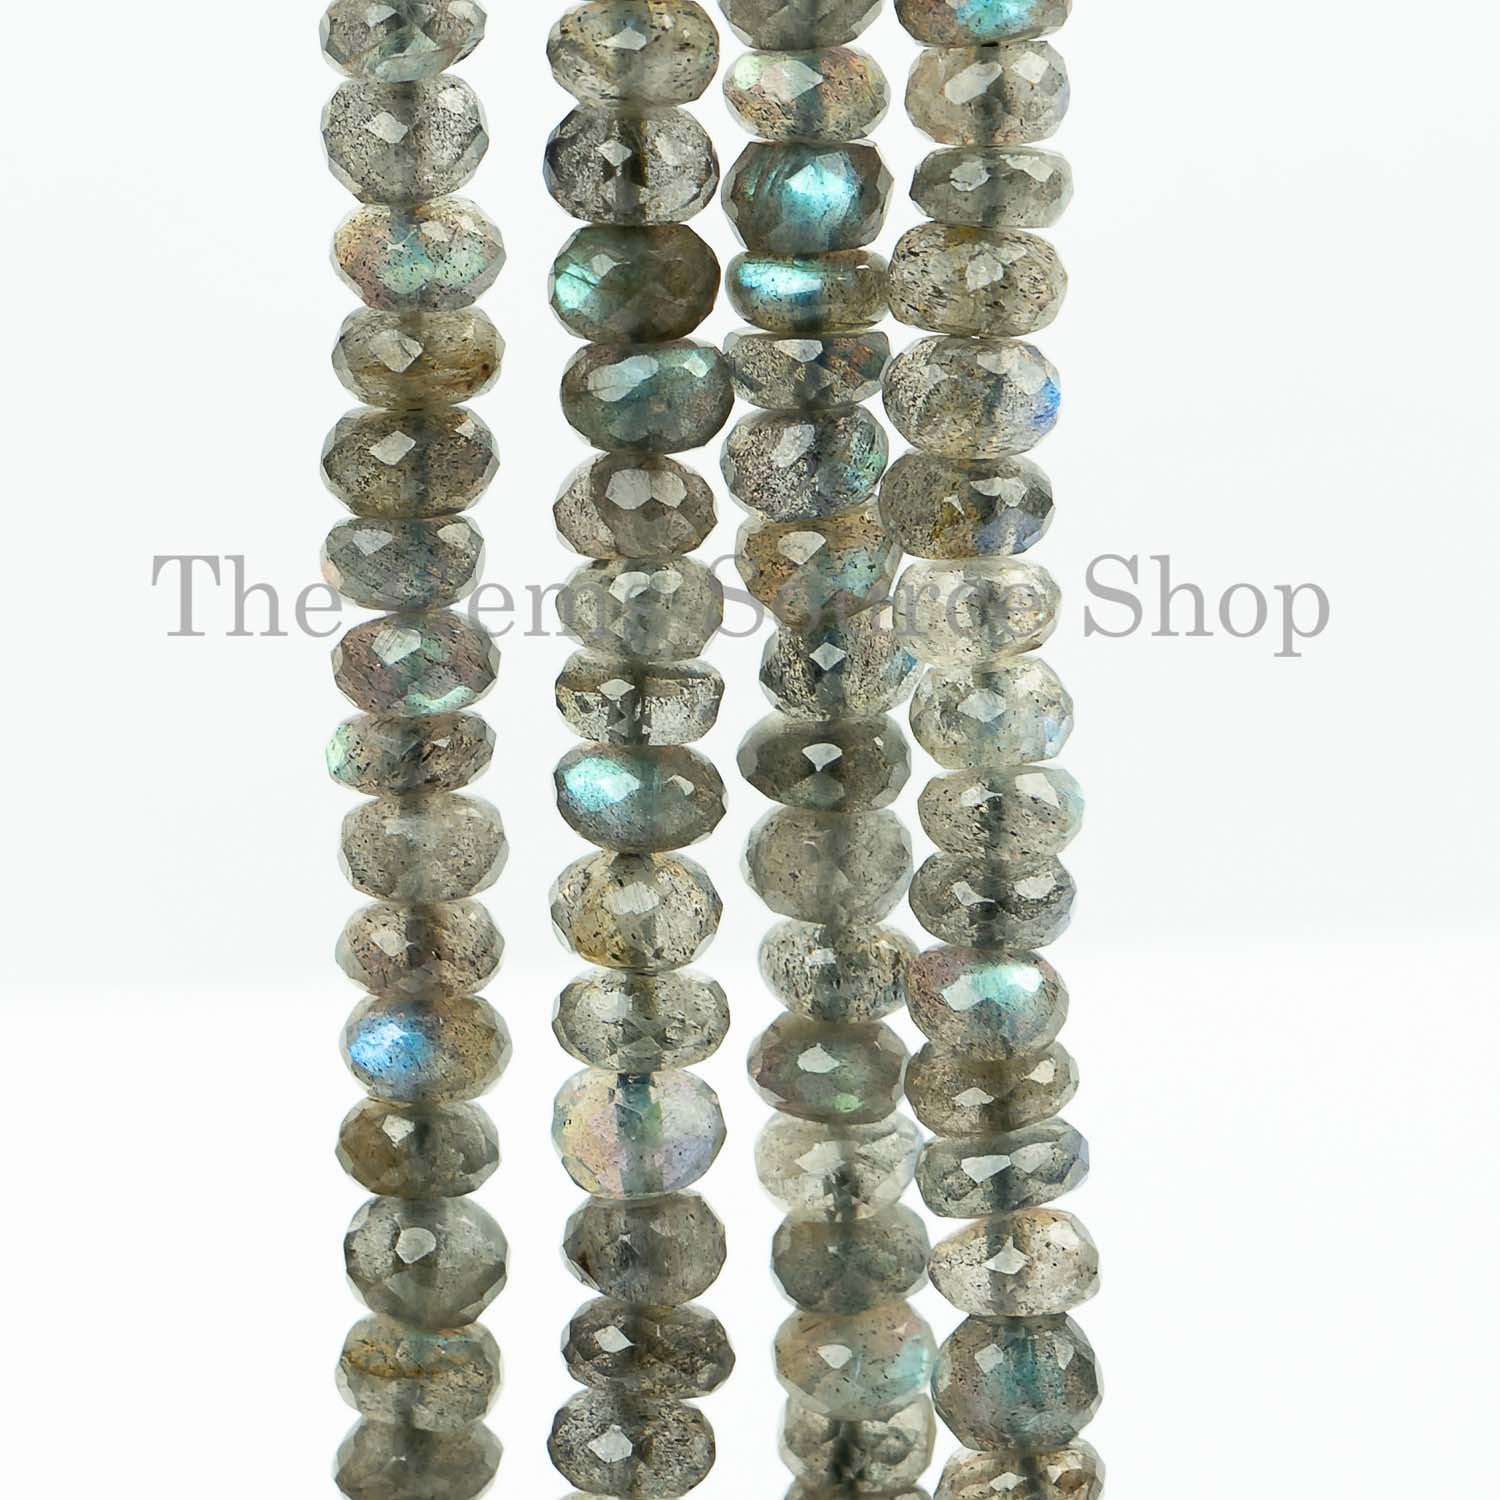 6.5 mm Labradorite Faceted Rondelle Beads, Labradorite Briolette Beads, Loose Labradorite Strand